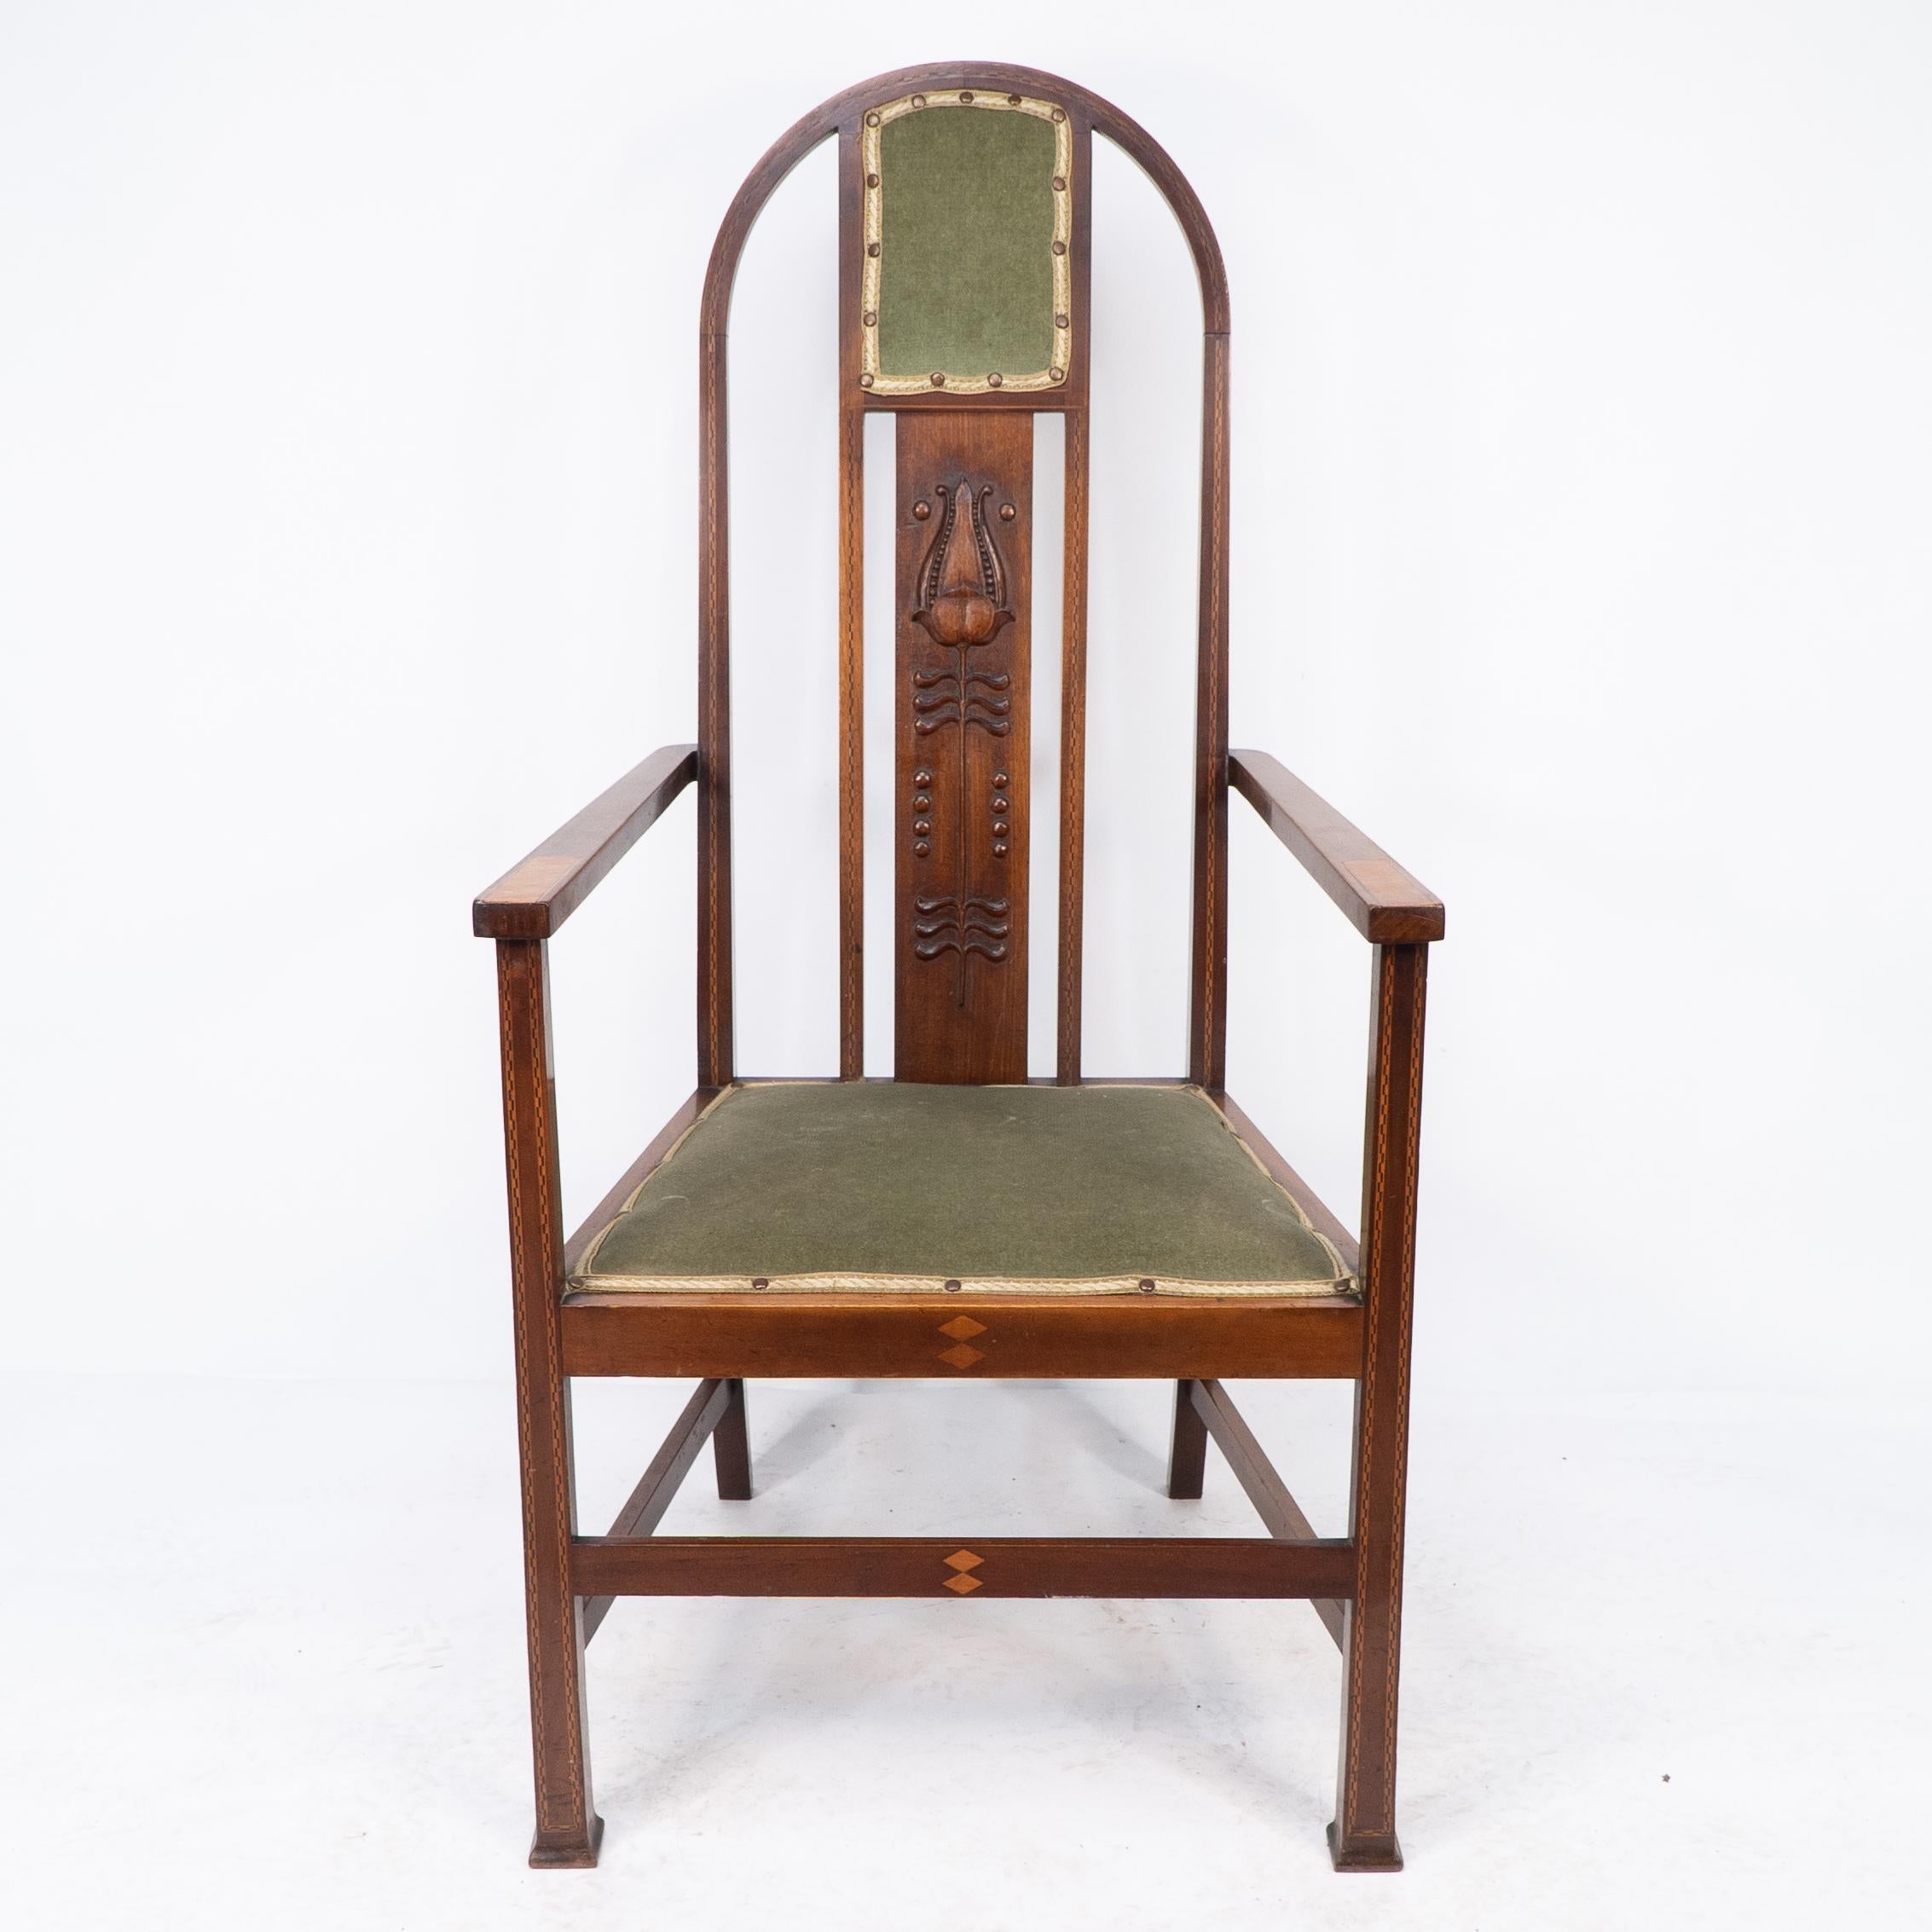 Liberty and Co attri, A pair of Arts and Crafts mahogany armchair, with carved stylized plant motif to the central splat fland by chequered ebony and boxwood stringing and inlaid Walnut strips to the arms with double diamond inlay to the front seat